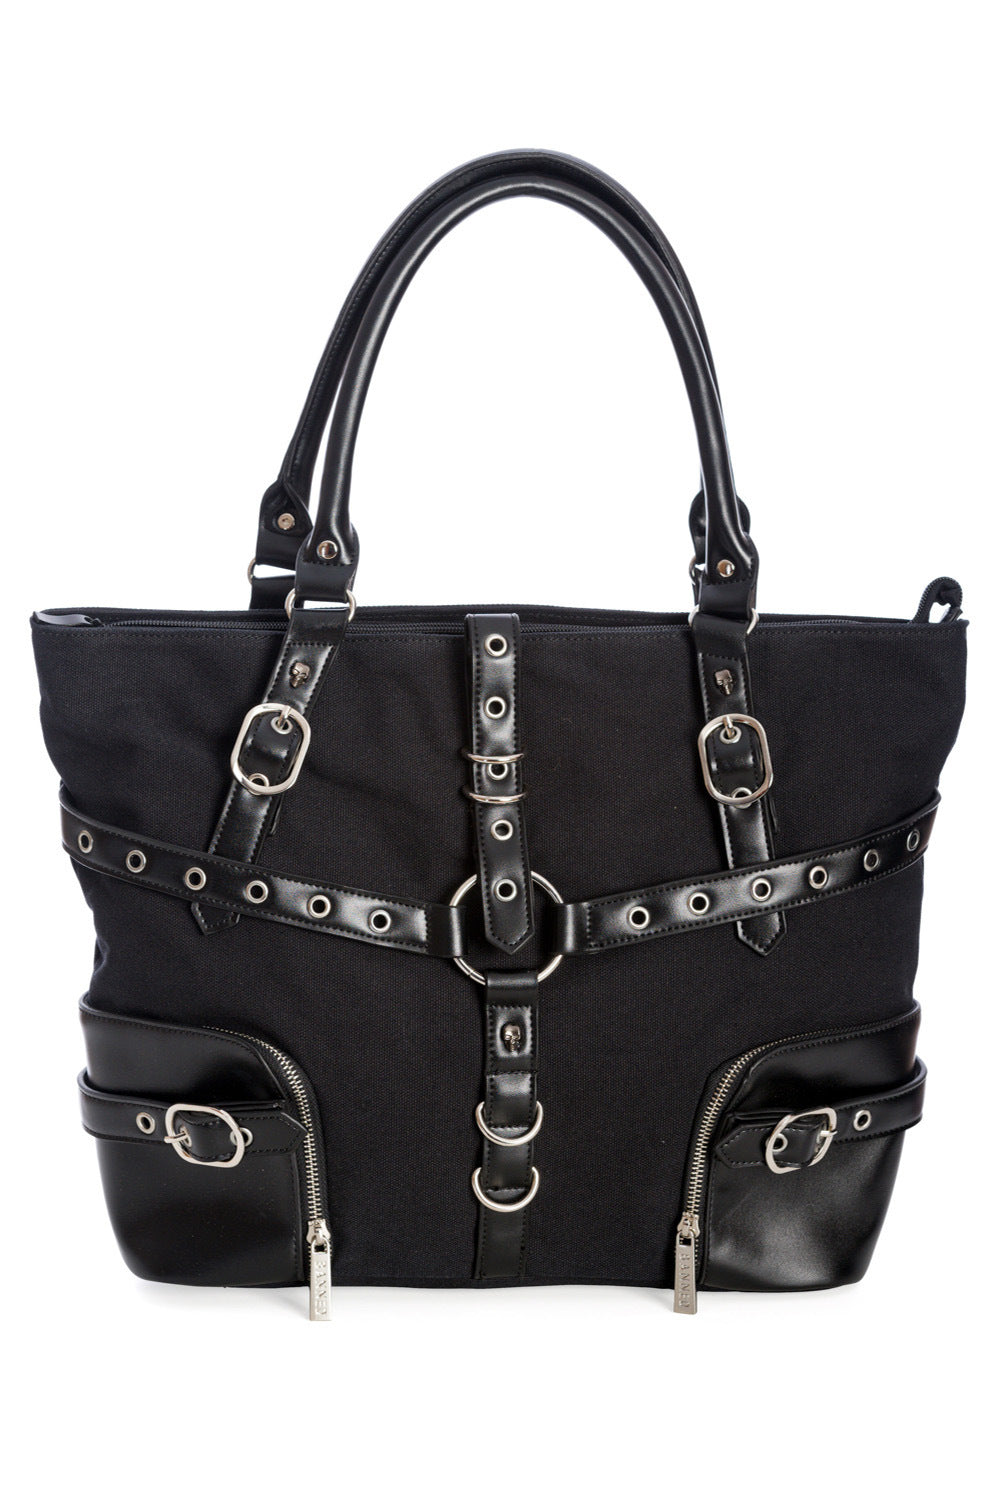 Gothic Punk Rock Savanna Tote by Lost Queen: Strappy Design with Metal Skull Studs